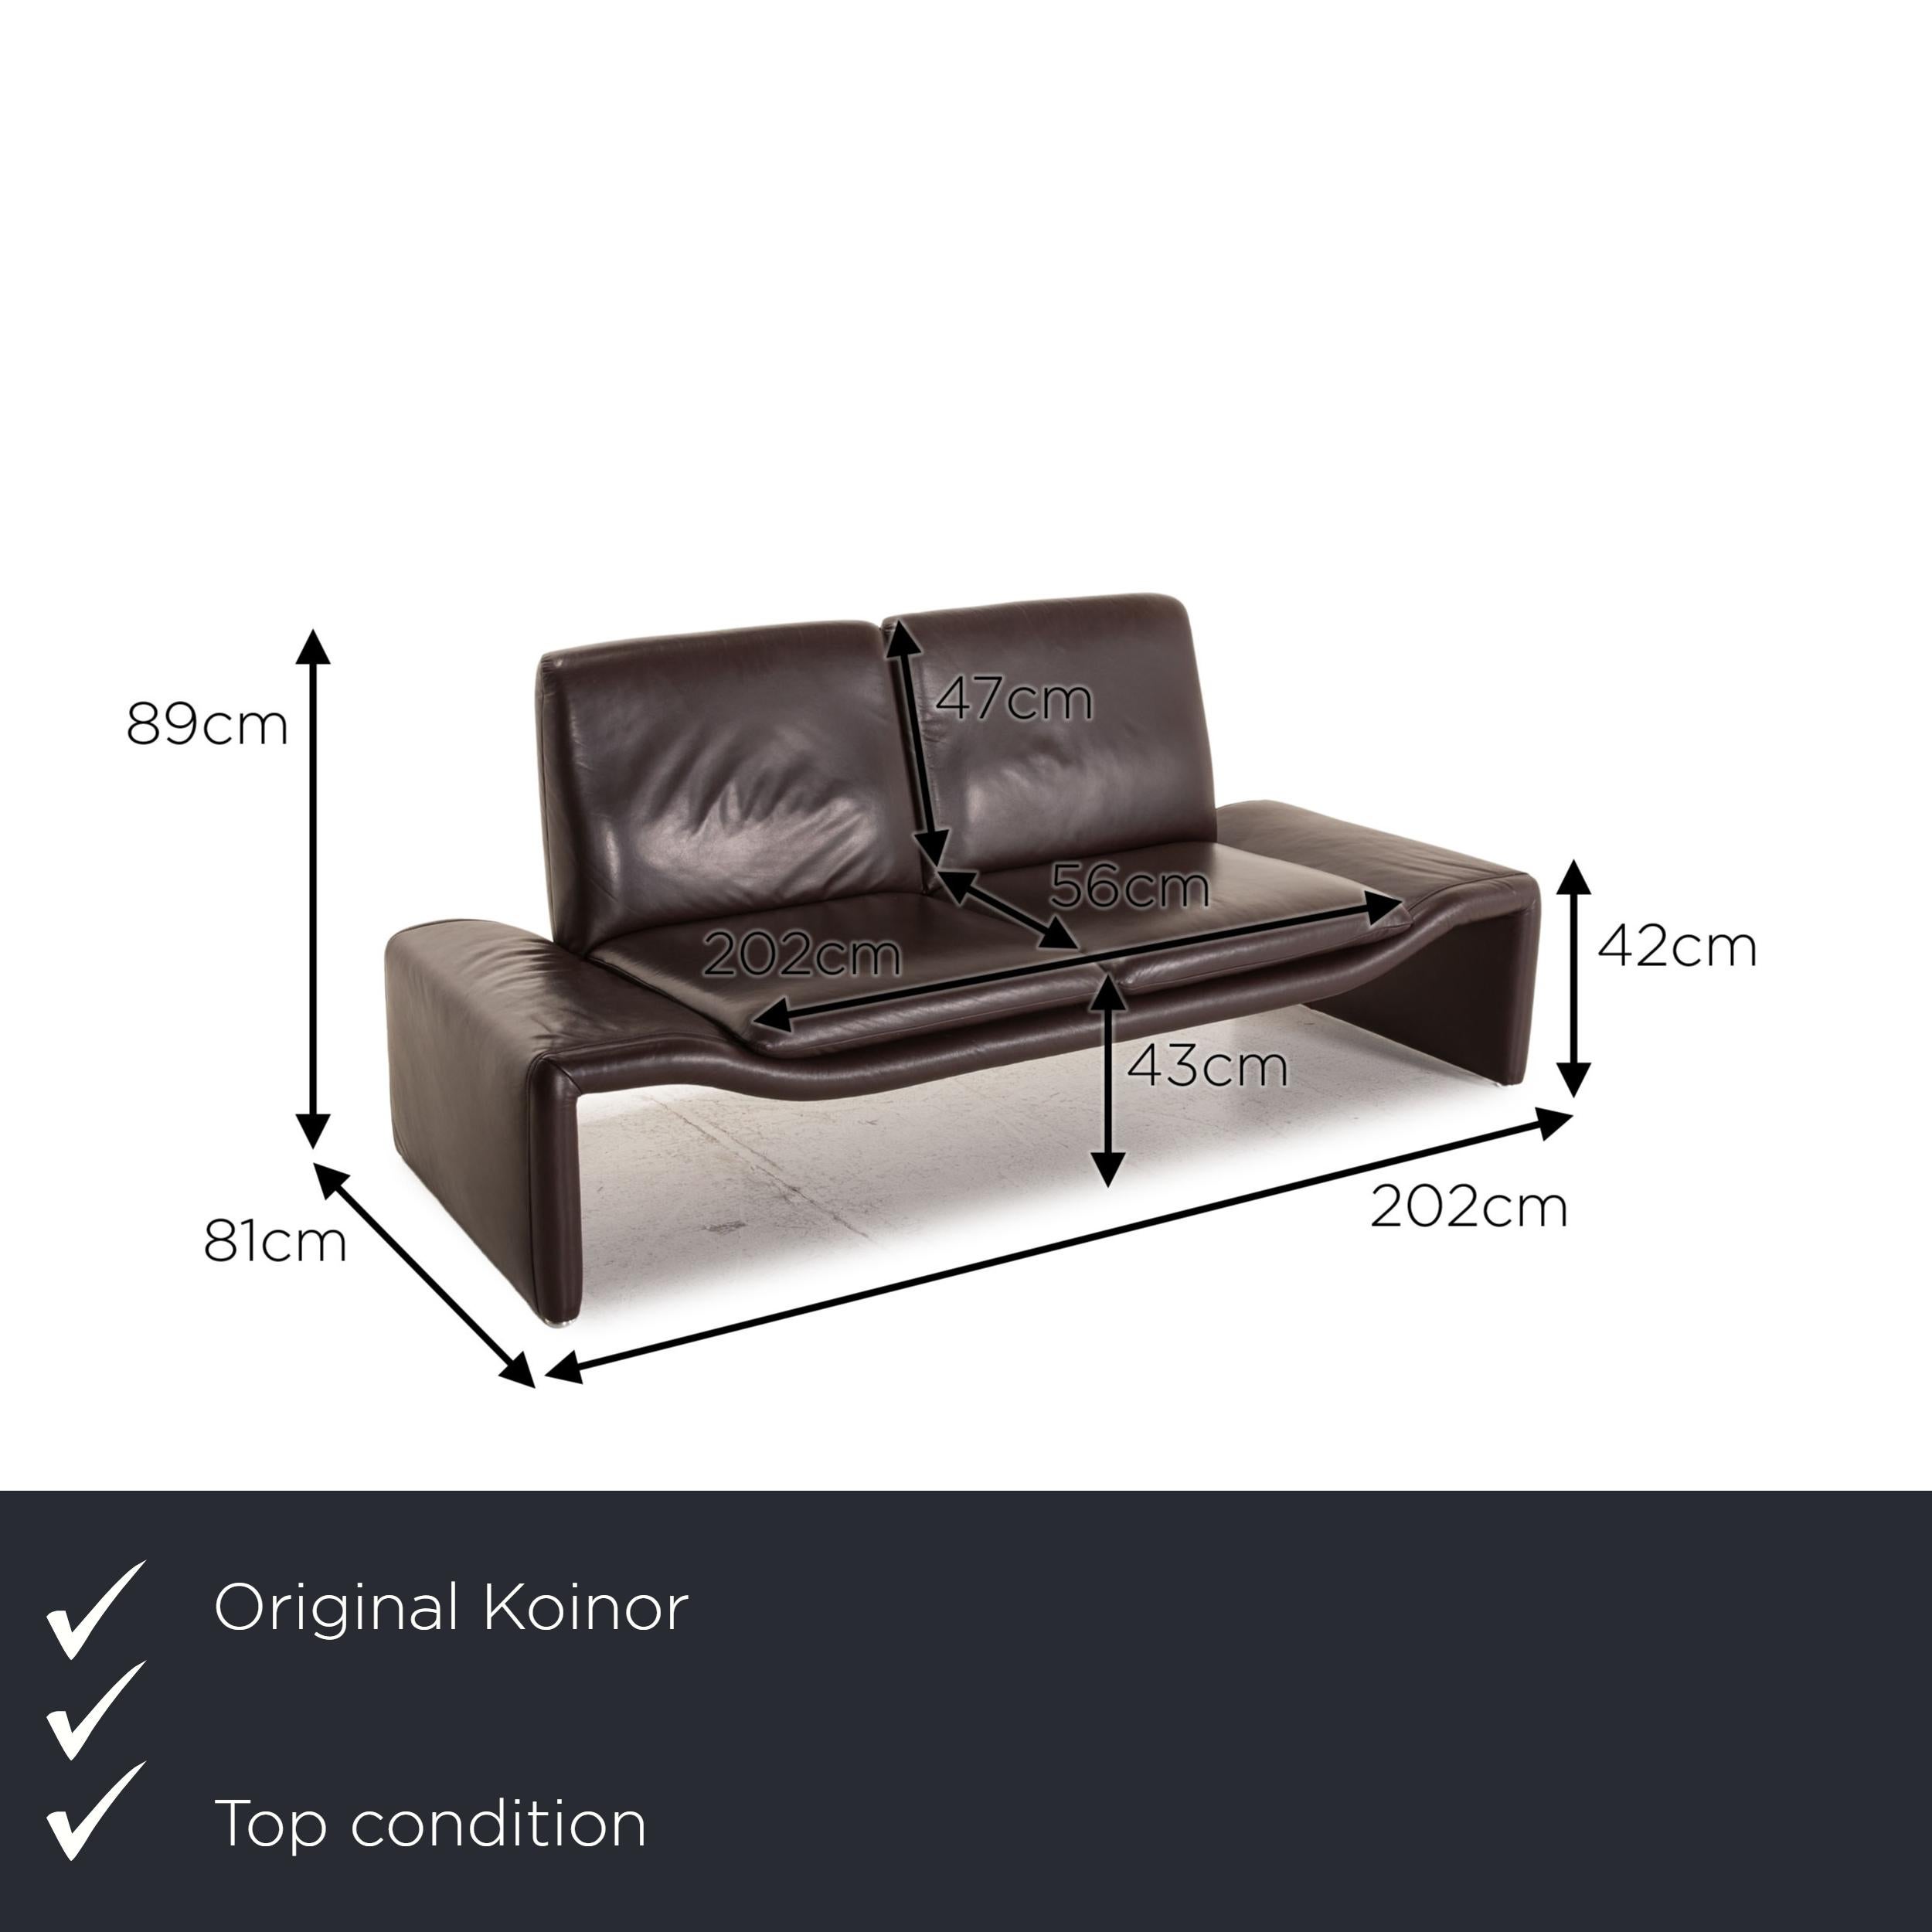 We present to you a Koinor Fellini leather sofa brown two seater couch.

Product measurements in centimeters:

Depth: 81
Width: 202
Height: 89
Seat height: 43
Rest height: 42
Seat depth: 56
Seat width: 202
Back height: 47.


      